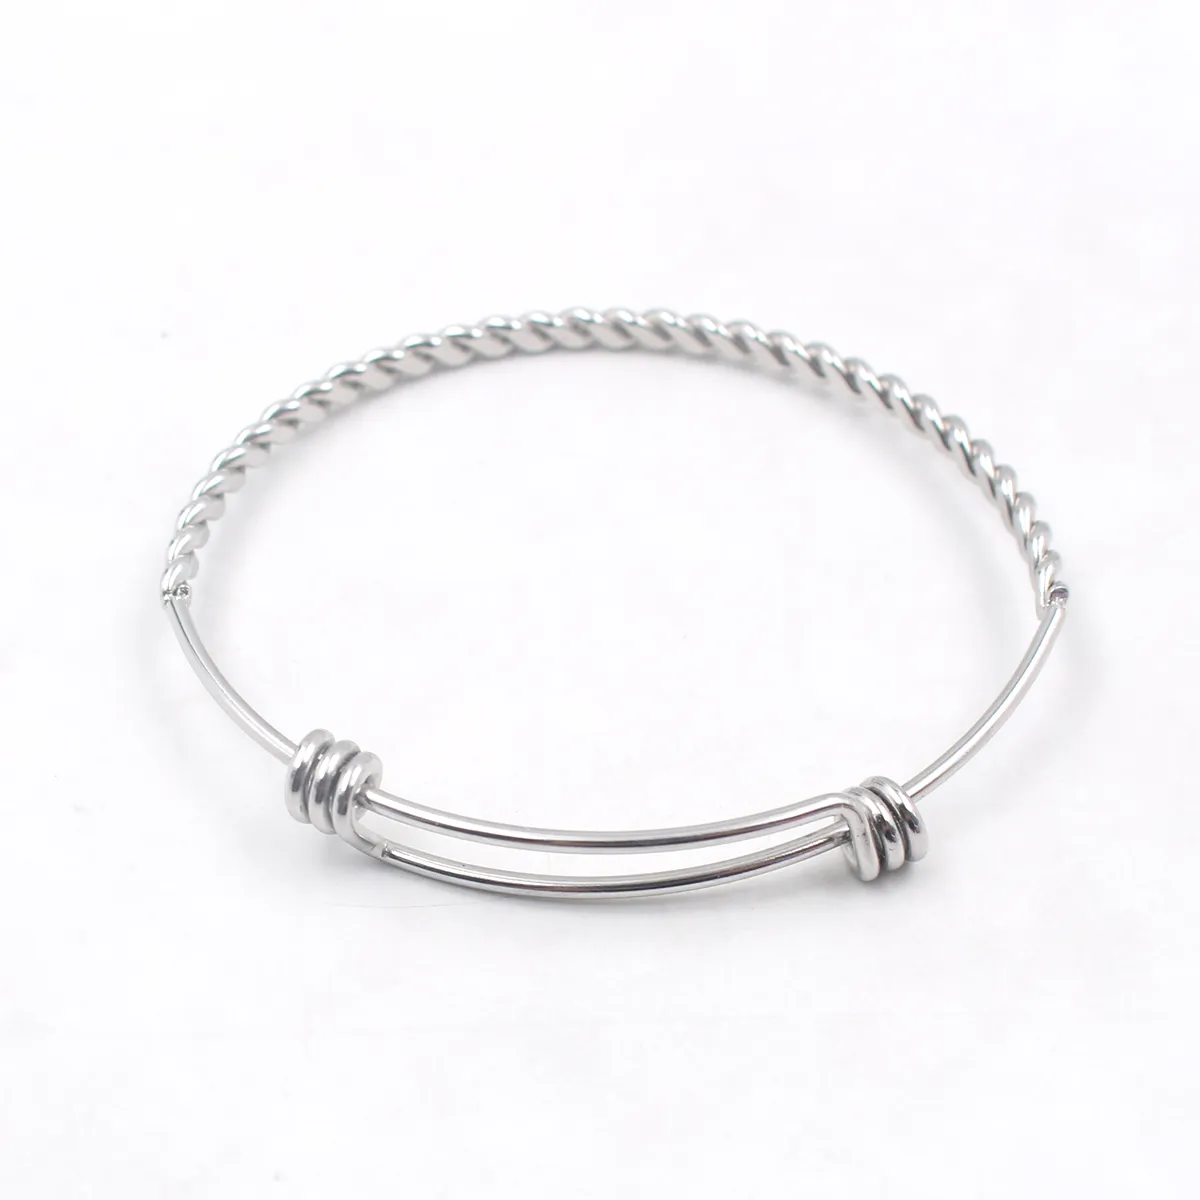 Blank Engravable Expandable Bangle Charm Bracelet in Stainless Steel